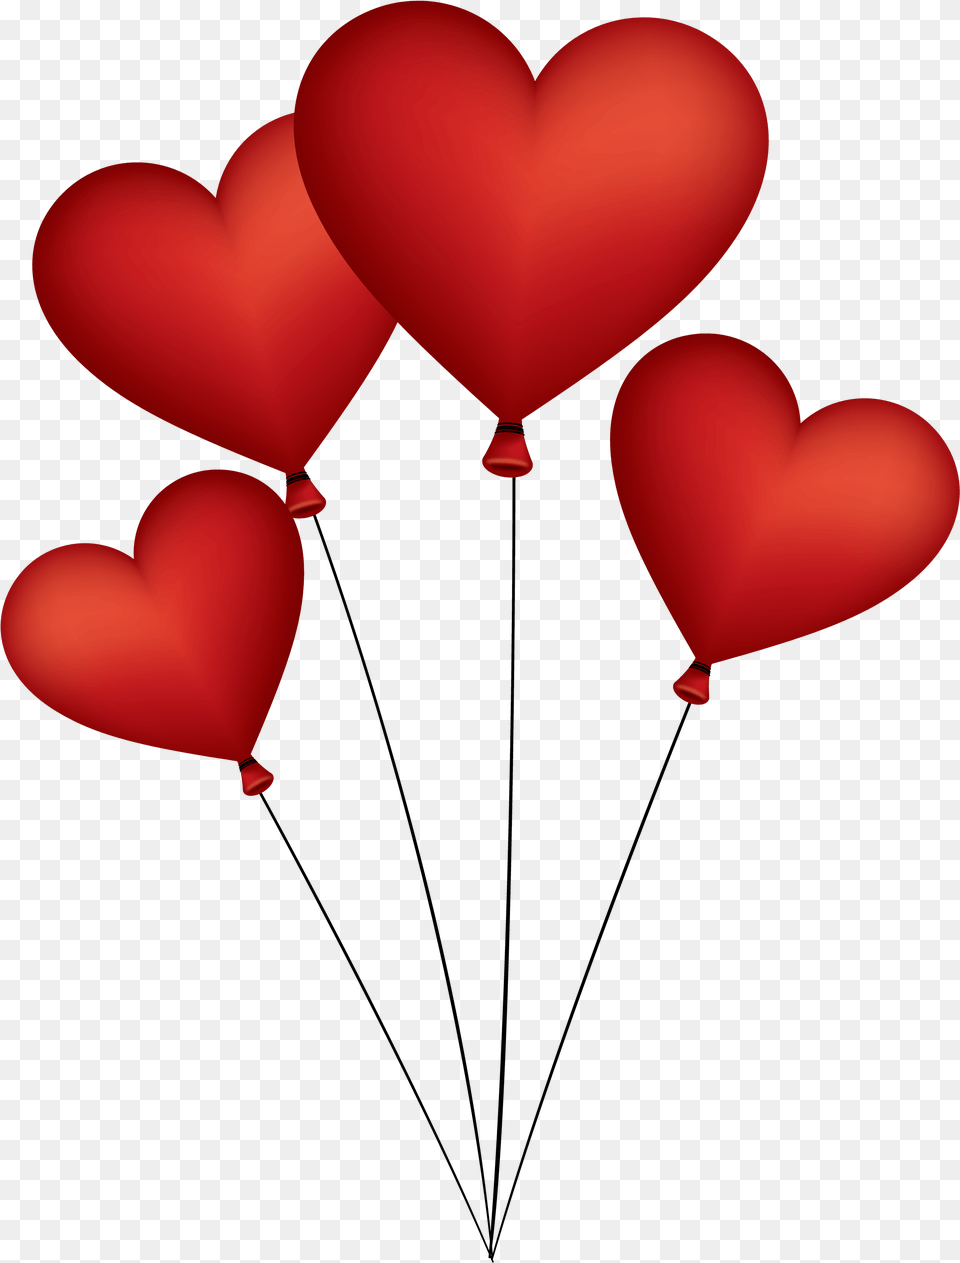 Heart Balloon Image Pngpix Valentines Day White Background Free Transparent Png